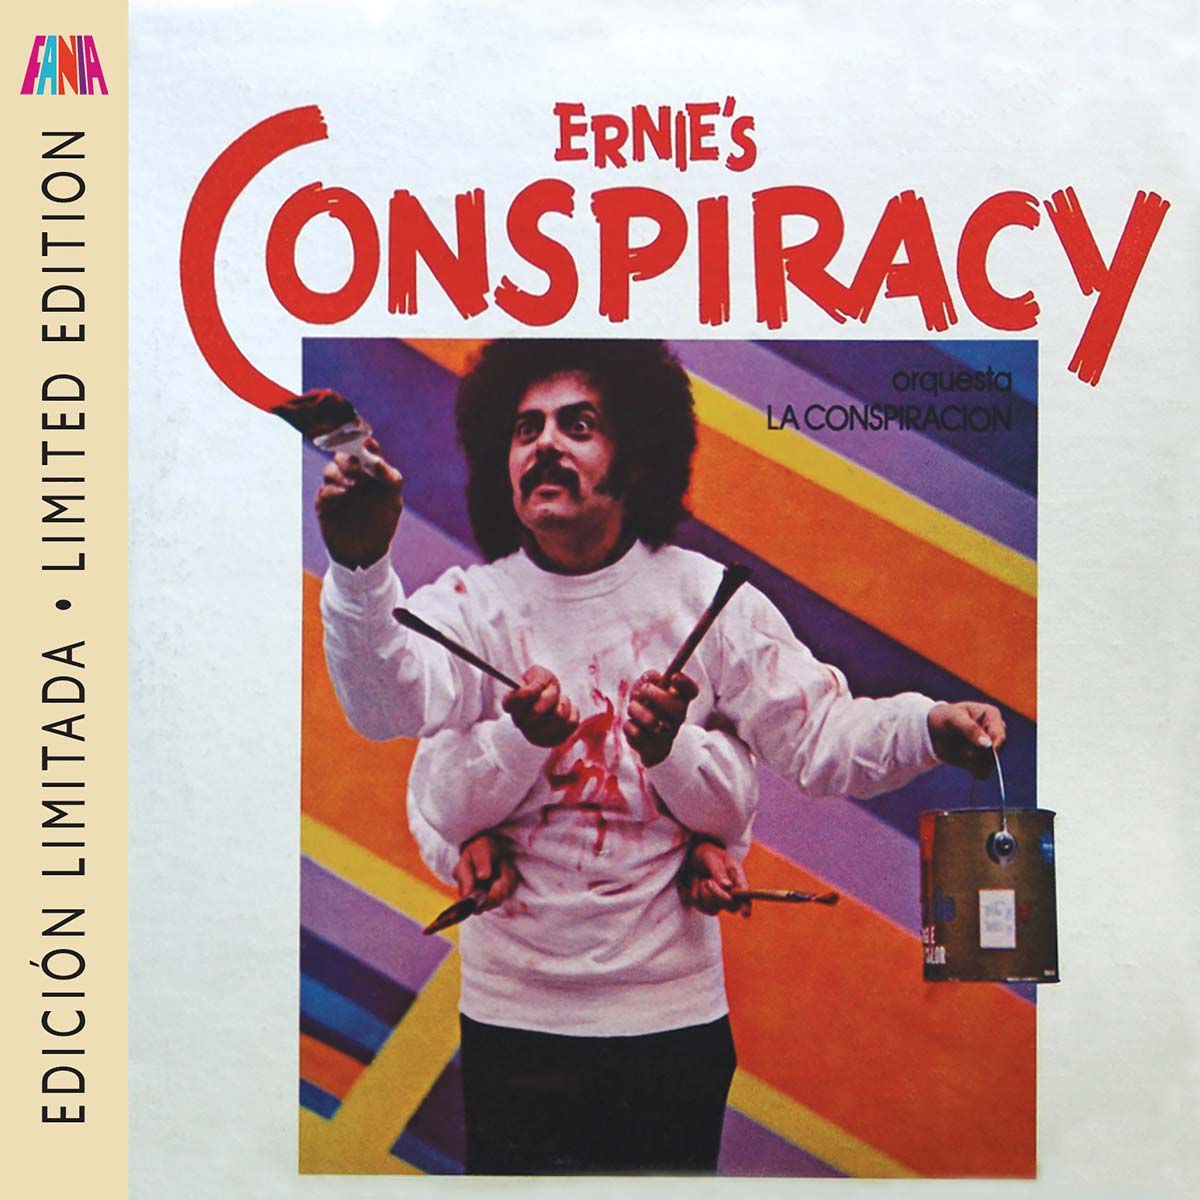 Featured Image for “ERNIE’S CONSPIRACY”